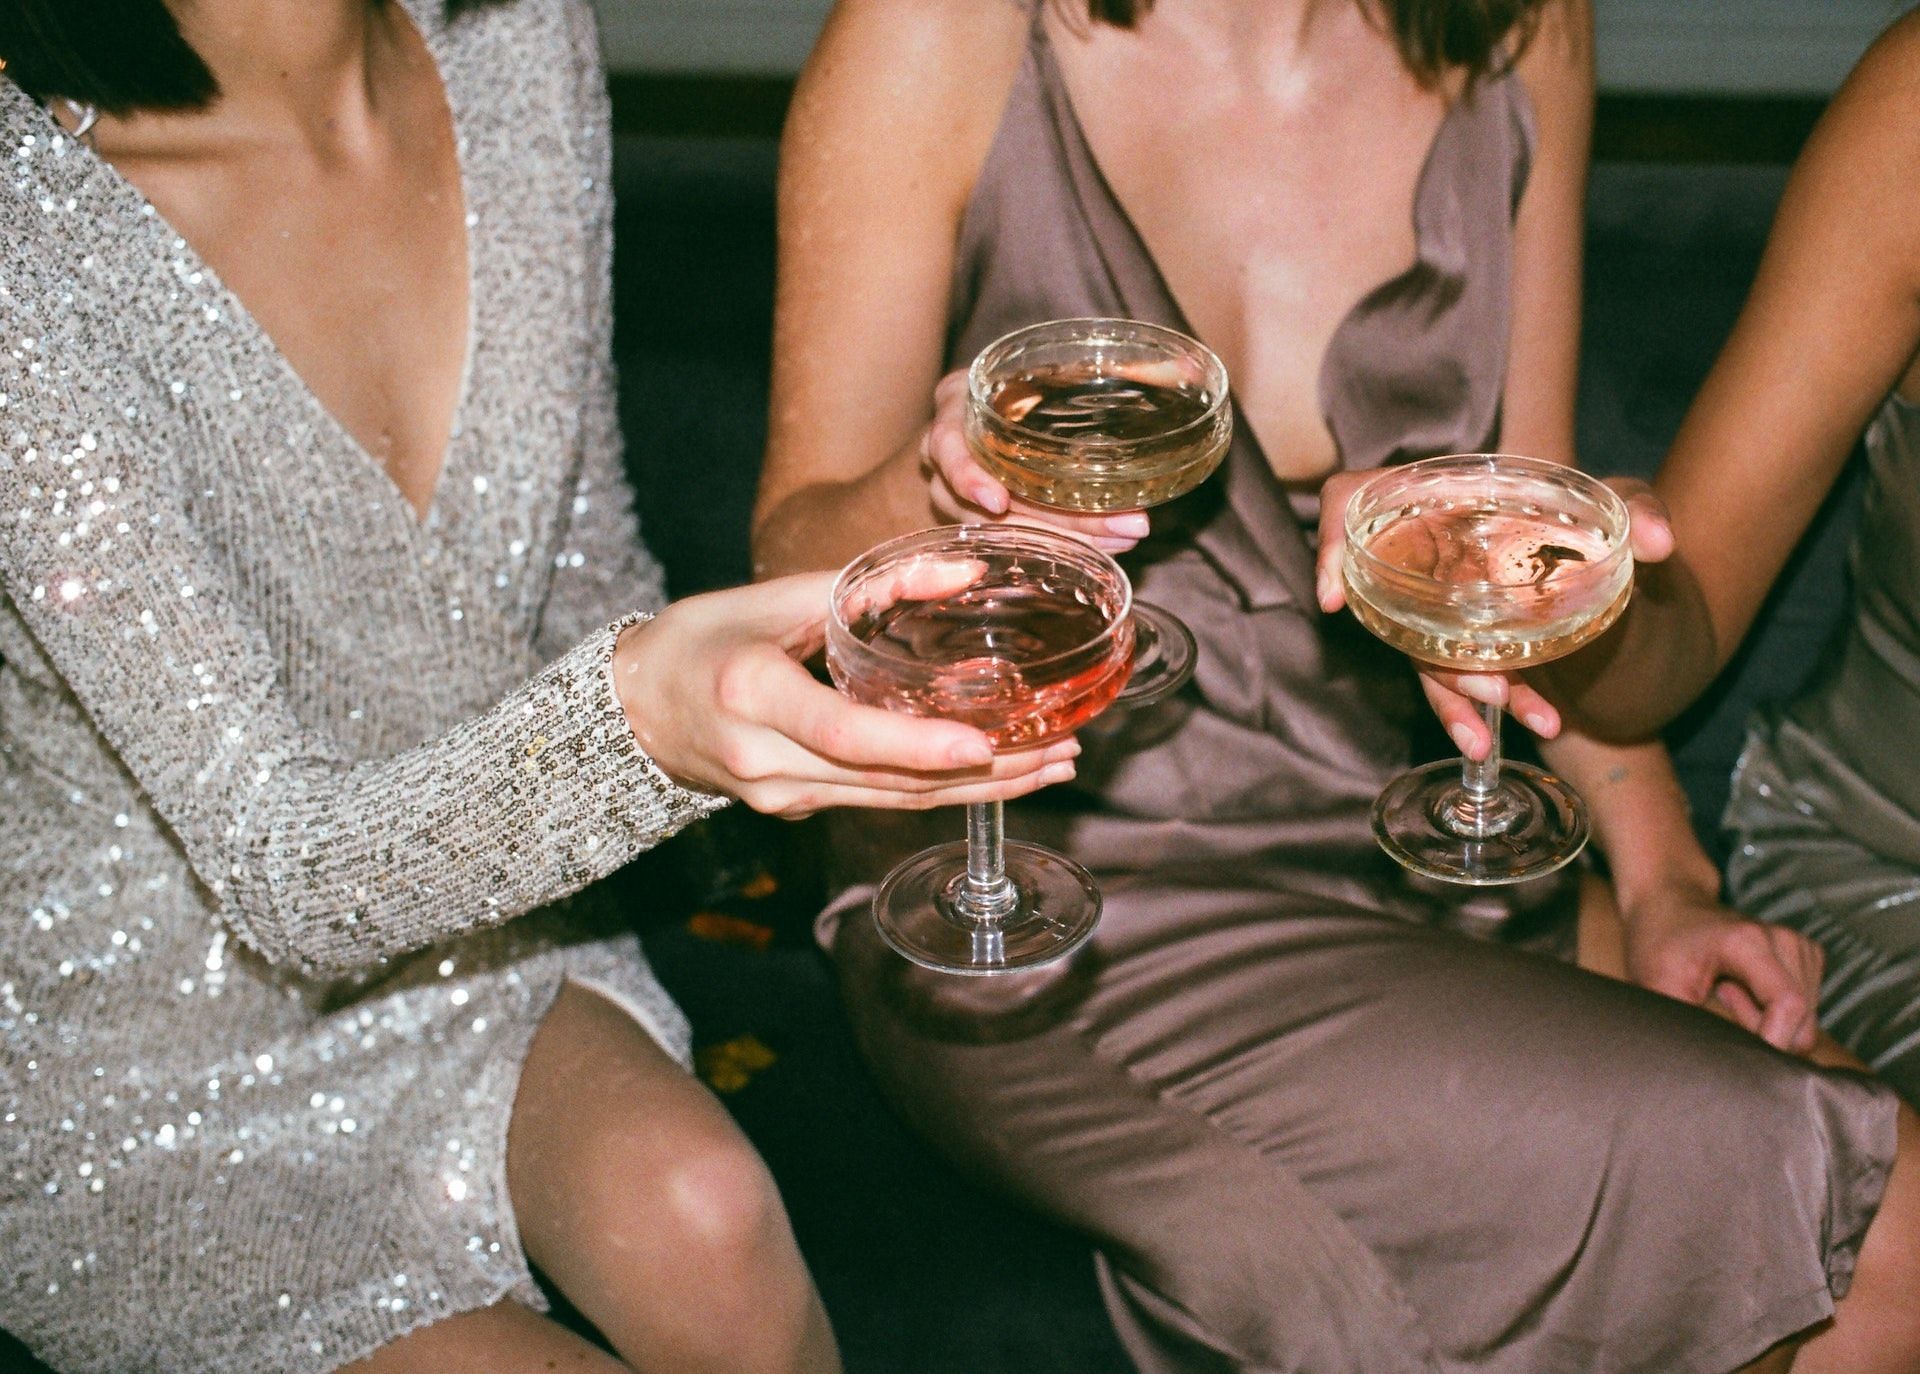 Alcohol can dehydrate your body. (Photo via Pexels/Inga Seliverstova)